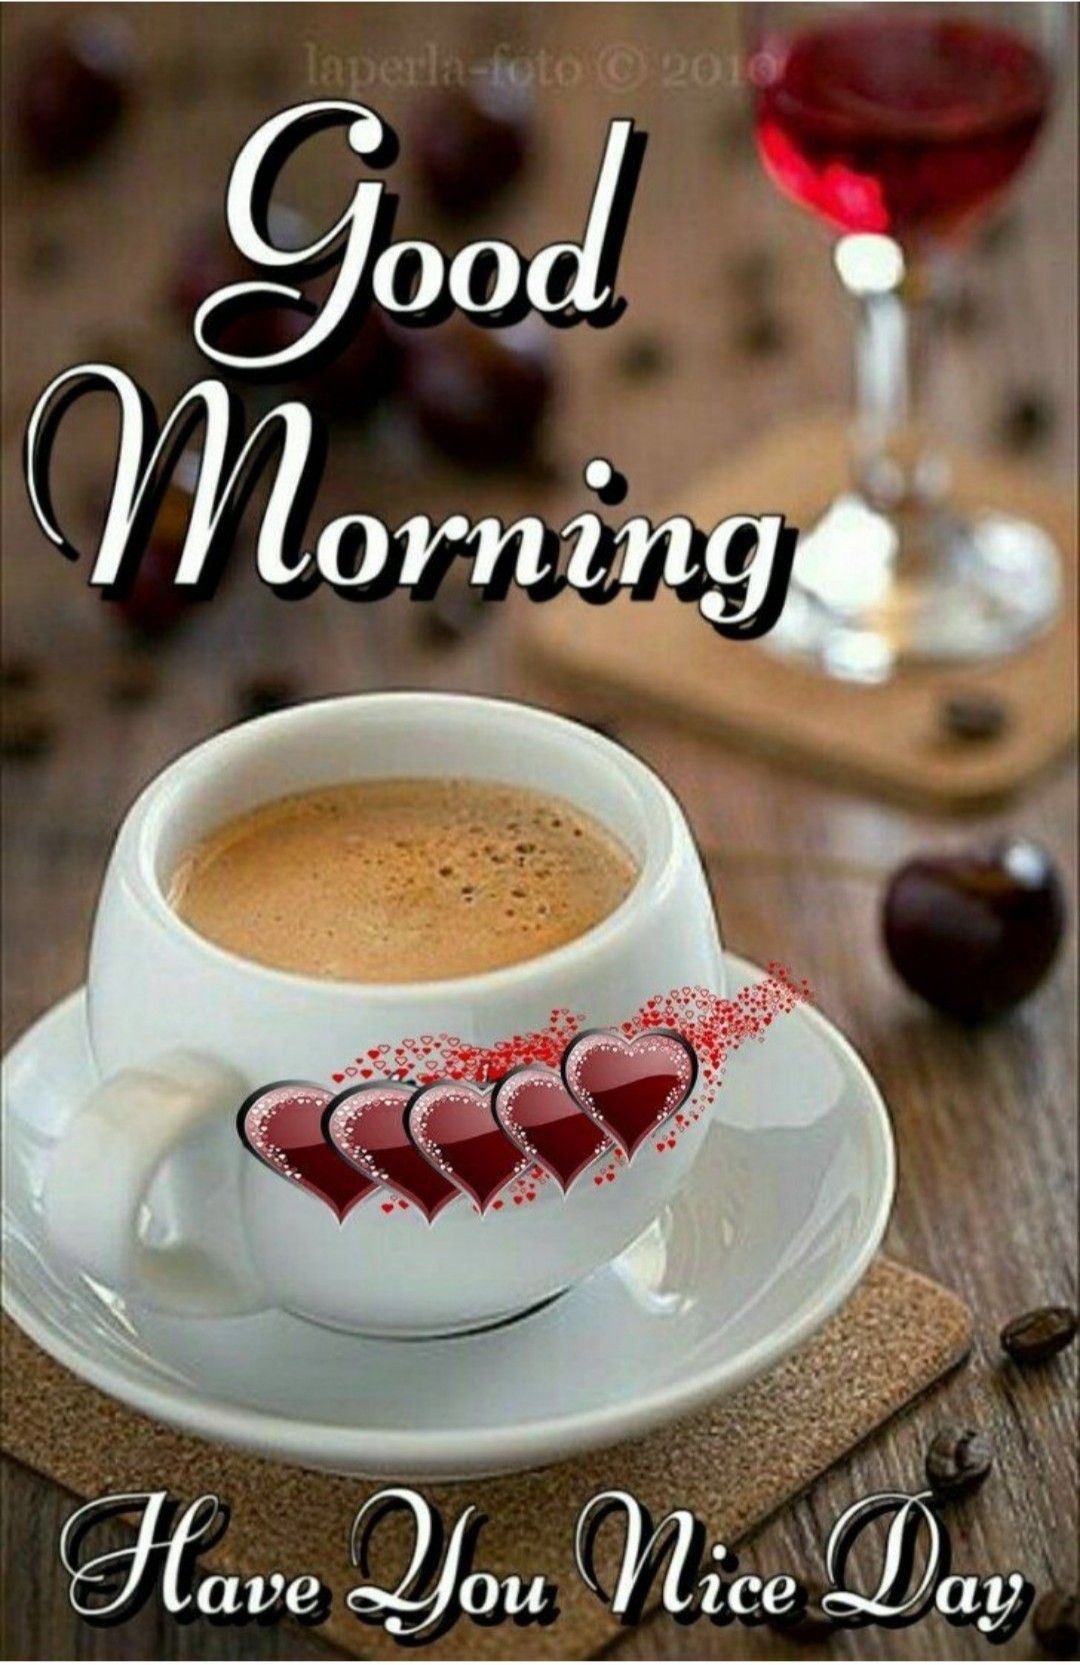 201+ Sweet Good Morning Images with Tea Cup - Good Morning